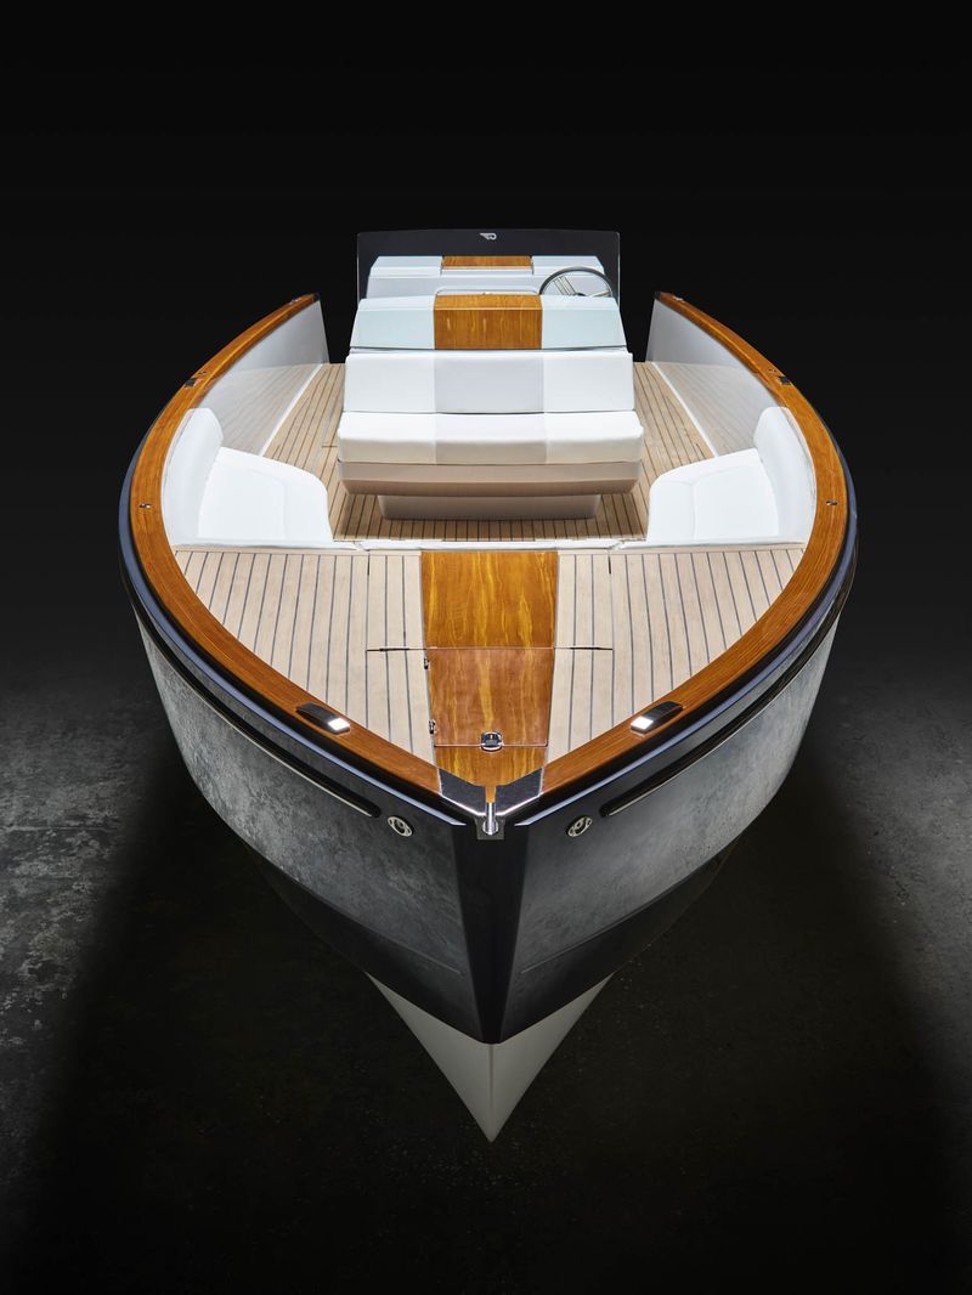 Dasher makes use of a light-weight synthetic teak for the decking (the lighter colored “wood” seen here) and its trademarked Artisanal Teak for the glossy trim.